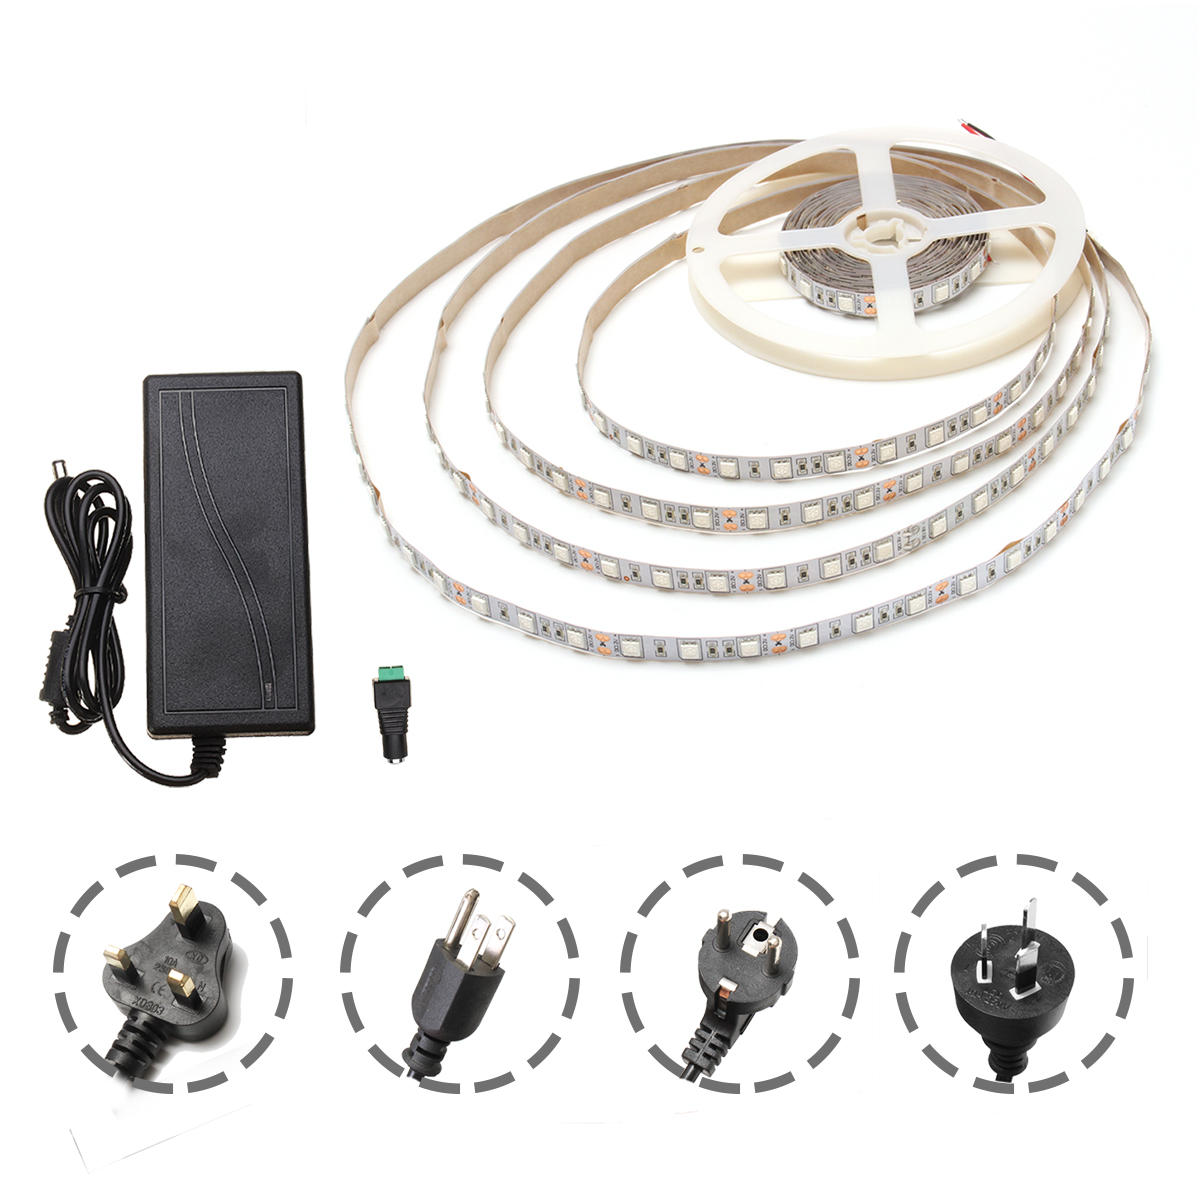 DC12V 5M Red:Blue 5:1 Non-waterproof SMD5050 Full SpectrumLED Strip Grow Light + Power Supply